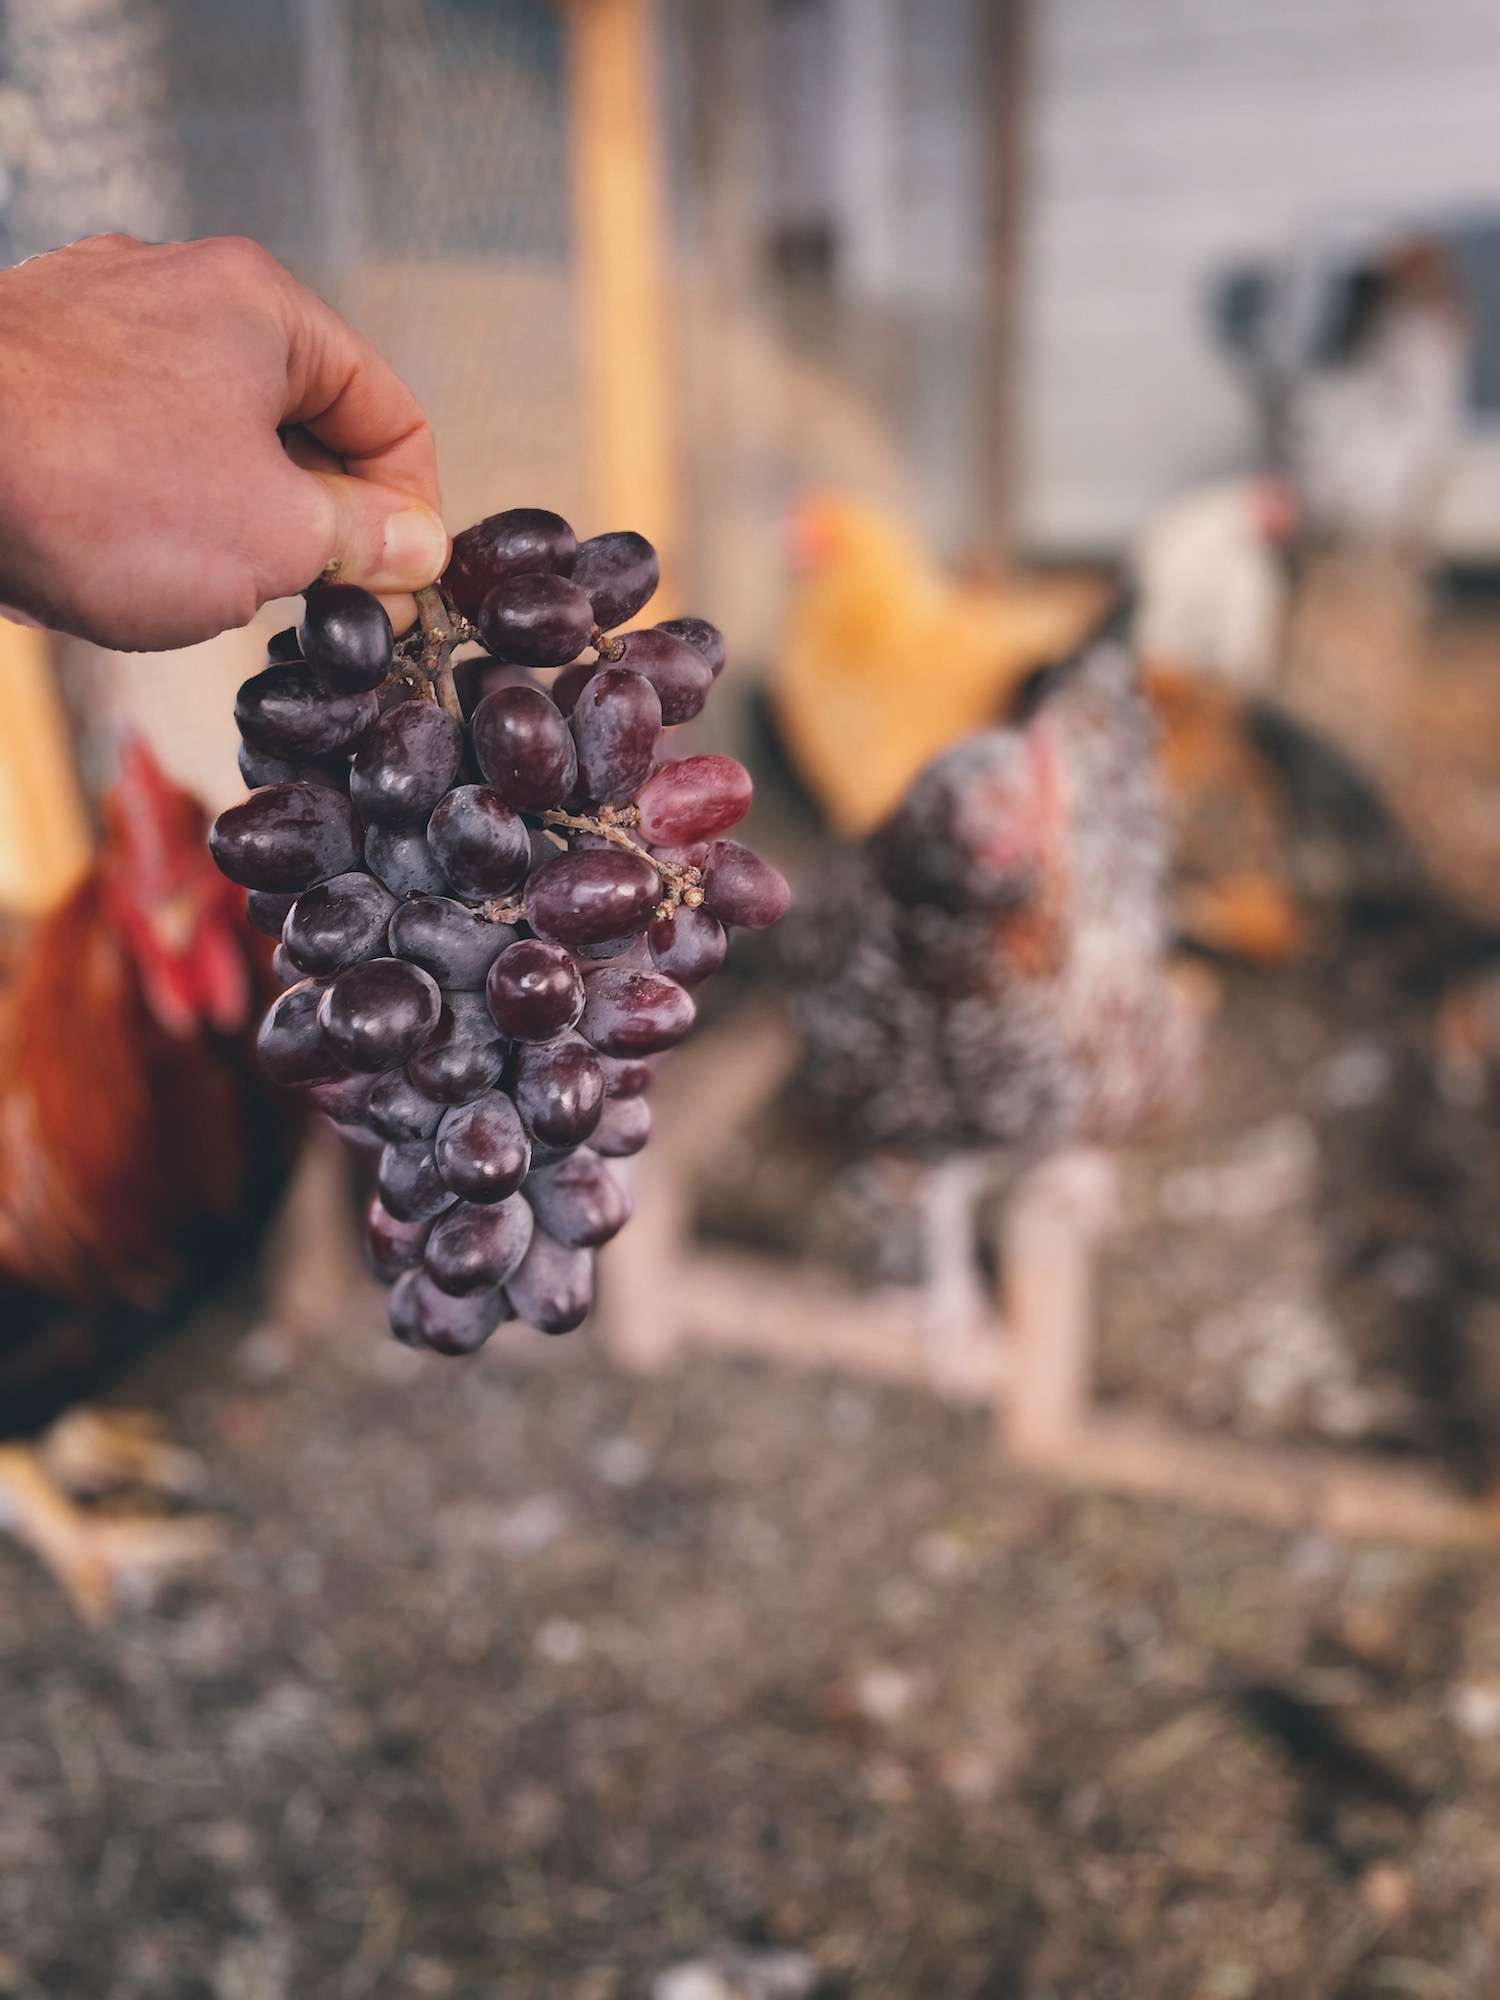 A bundle of grapes held out in front of a group of chickens in the chicken run